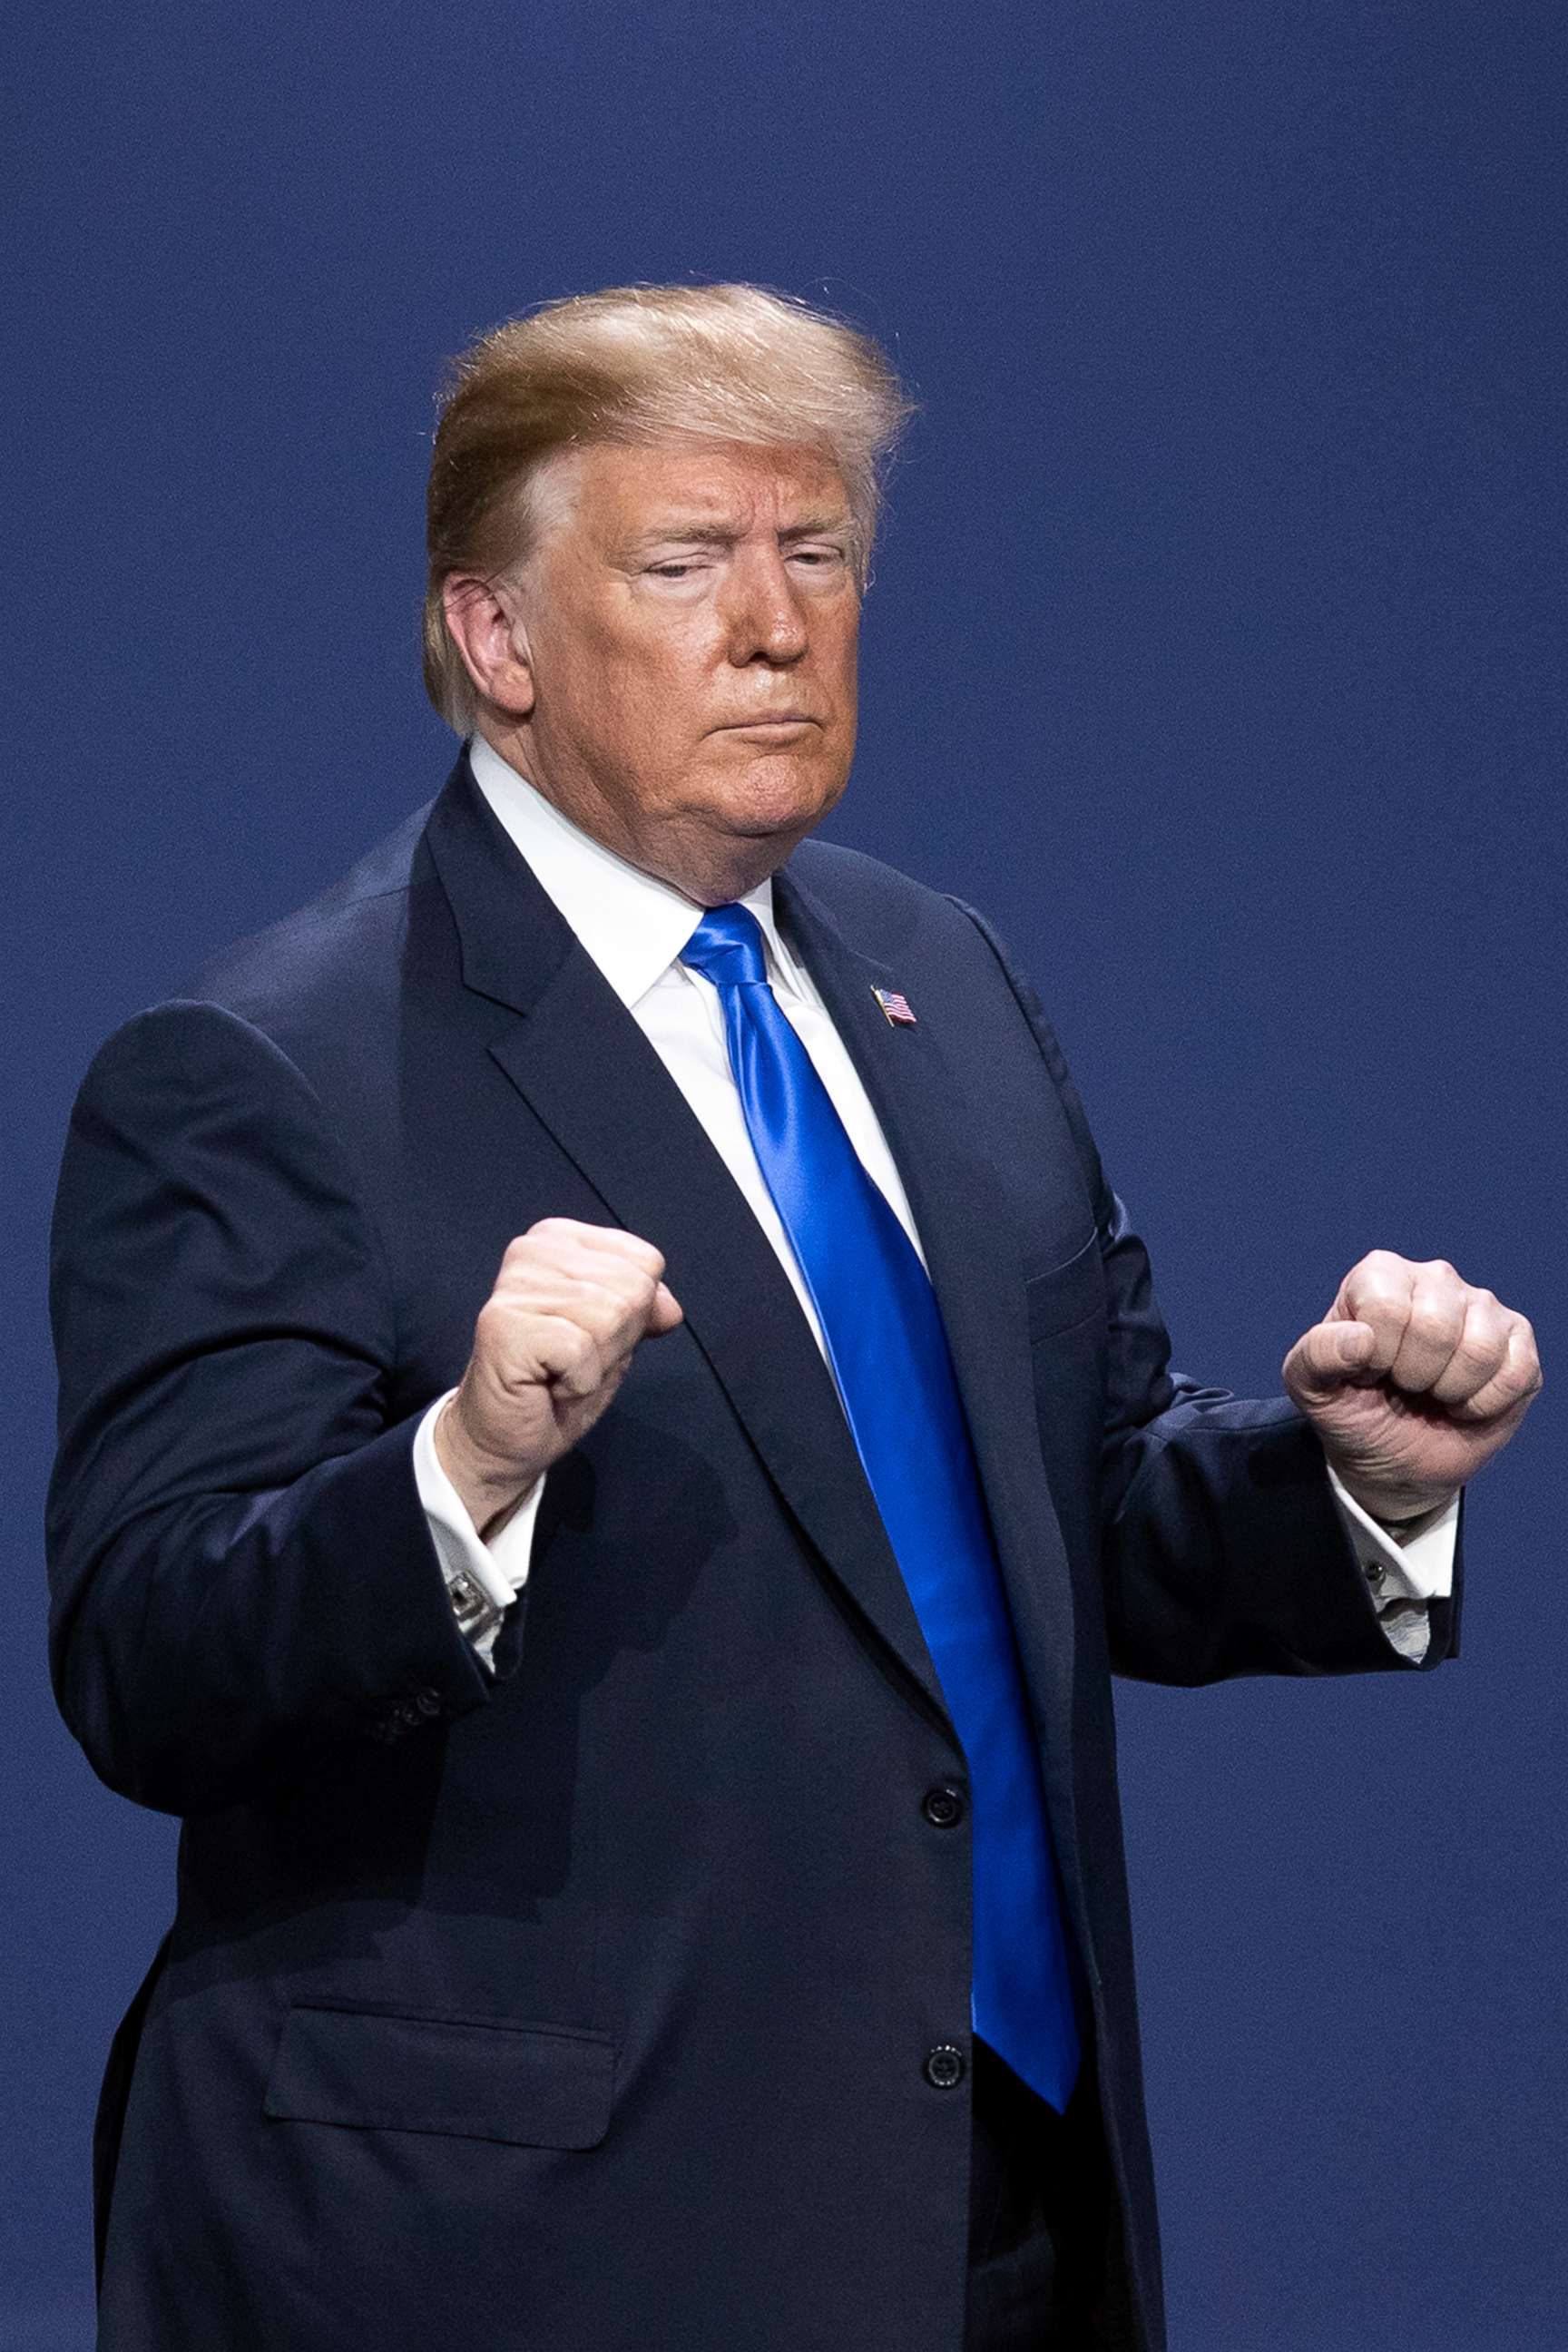 PHOTO: President Donald Trump gestures to the crowd after he delivered a speech during a Republican Jewish Coalition meeting in Las Vegas, April 6, 2019.